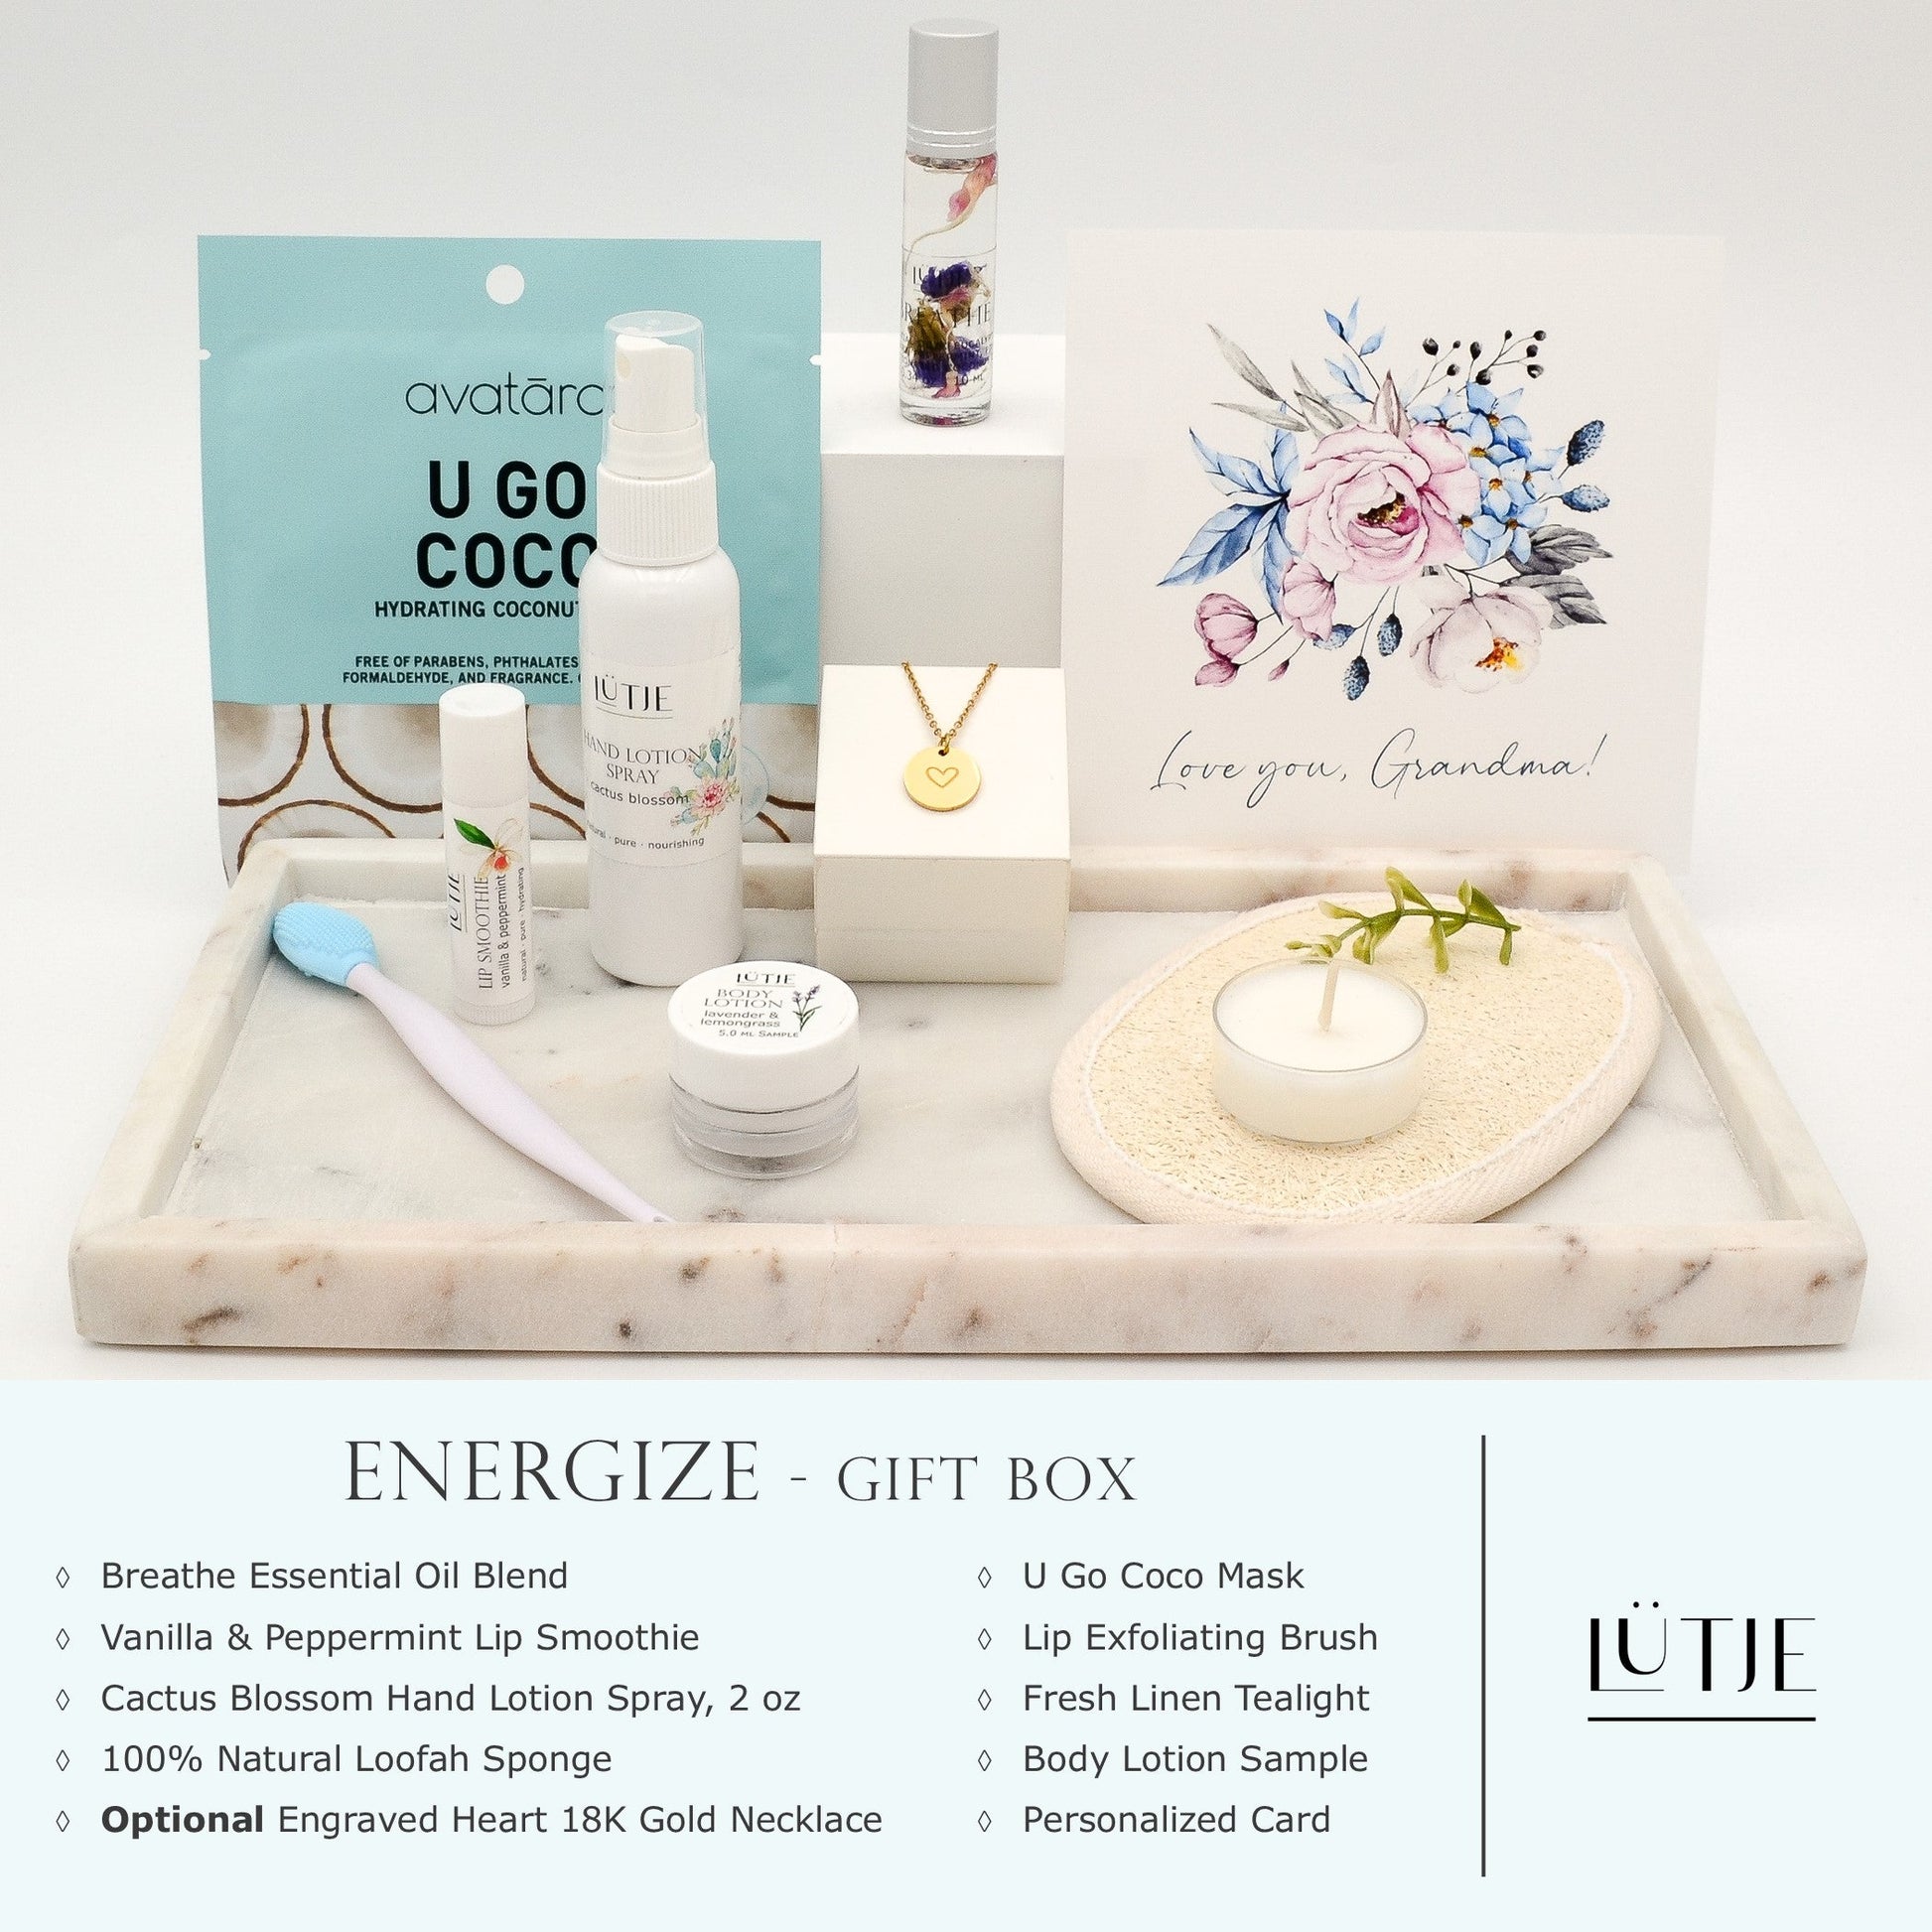 Energize Gift Box for women, BFF, wife, daughter, sister, mom, or grandma, includes Cactus Blossom hand lotion spray, essential oil, lip balm, hydrating face mask, other bath, spa and self-care items, and 18K gold-plated necklace with engraved heart.